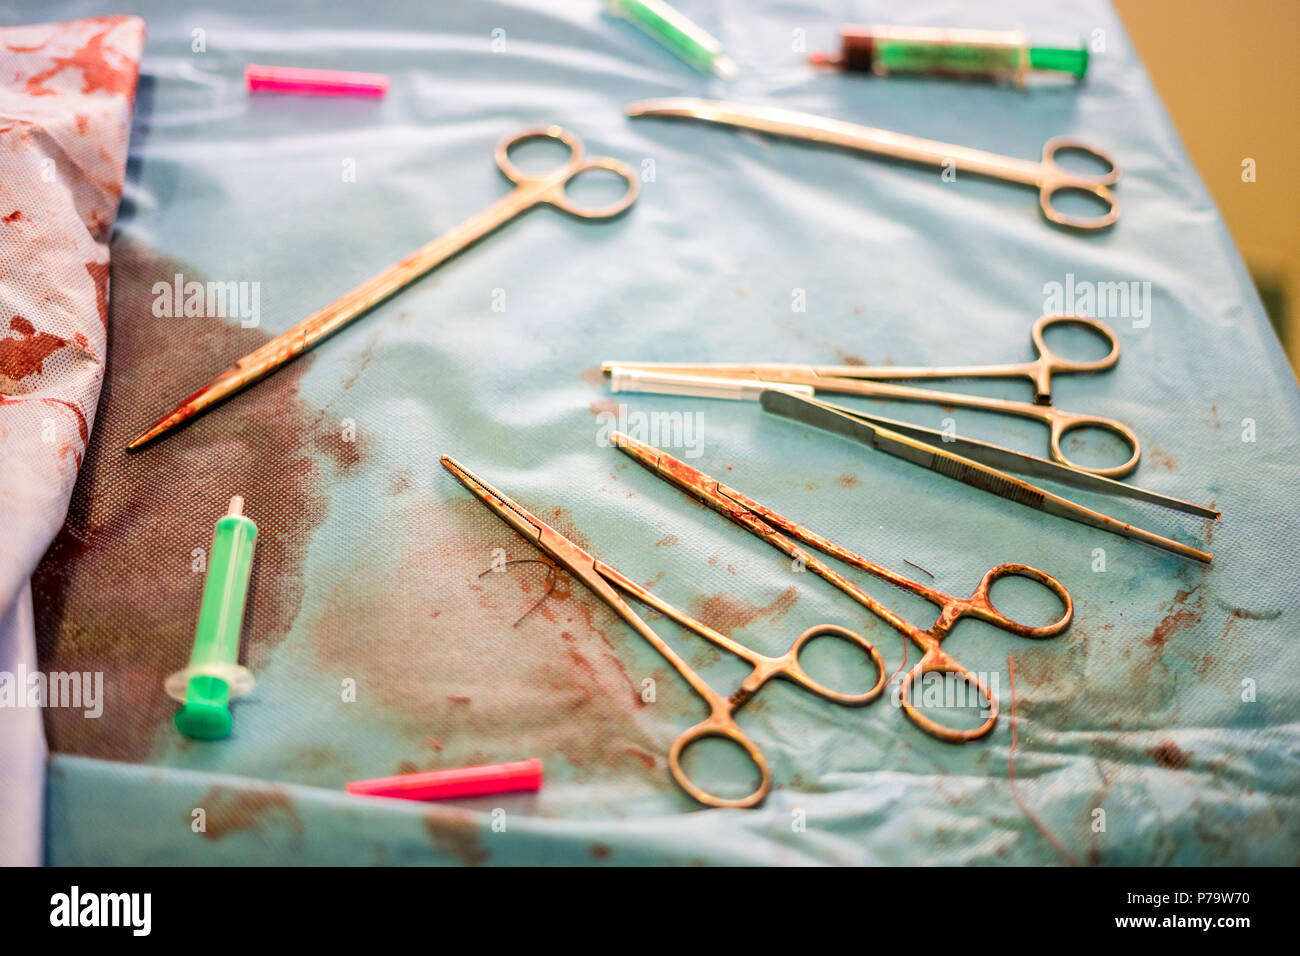 Silver gynecologist tools used during childbirth in the hospital Stock Photo